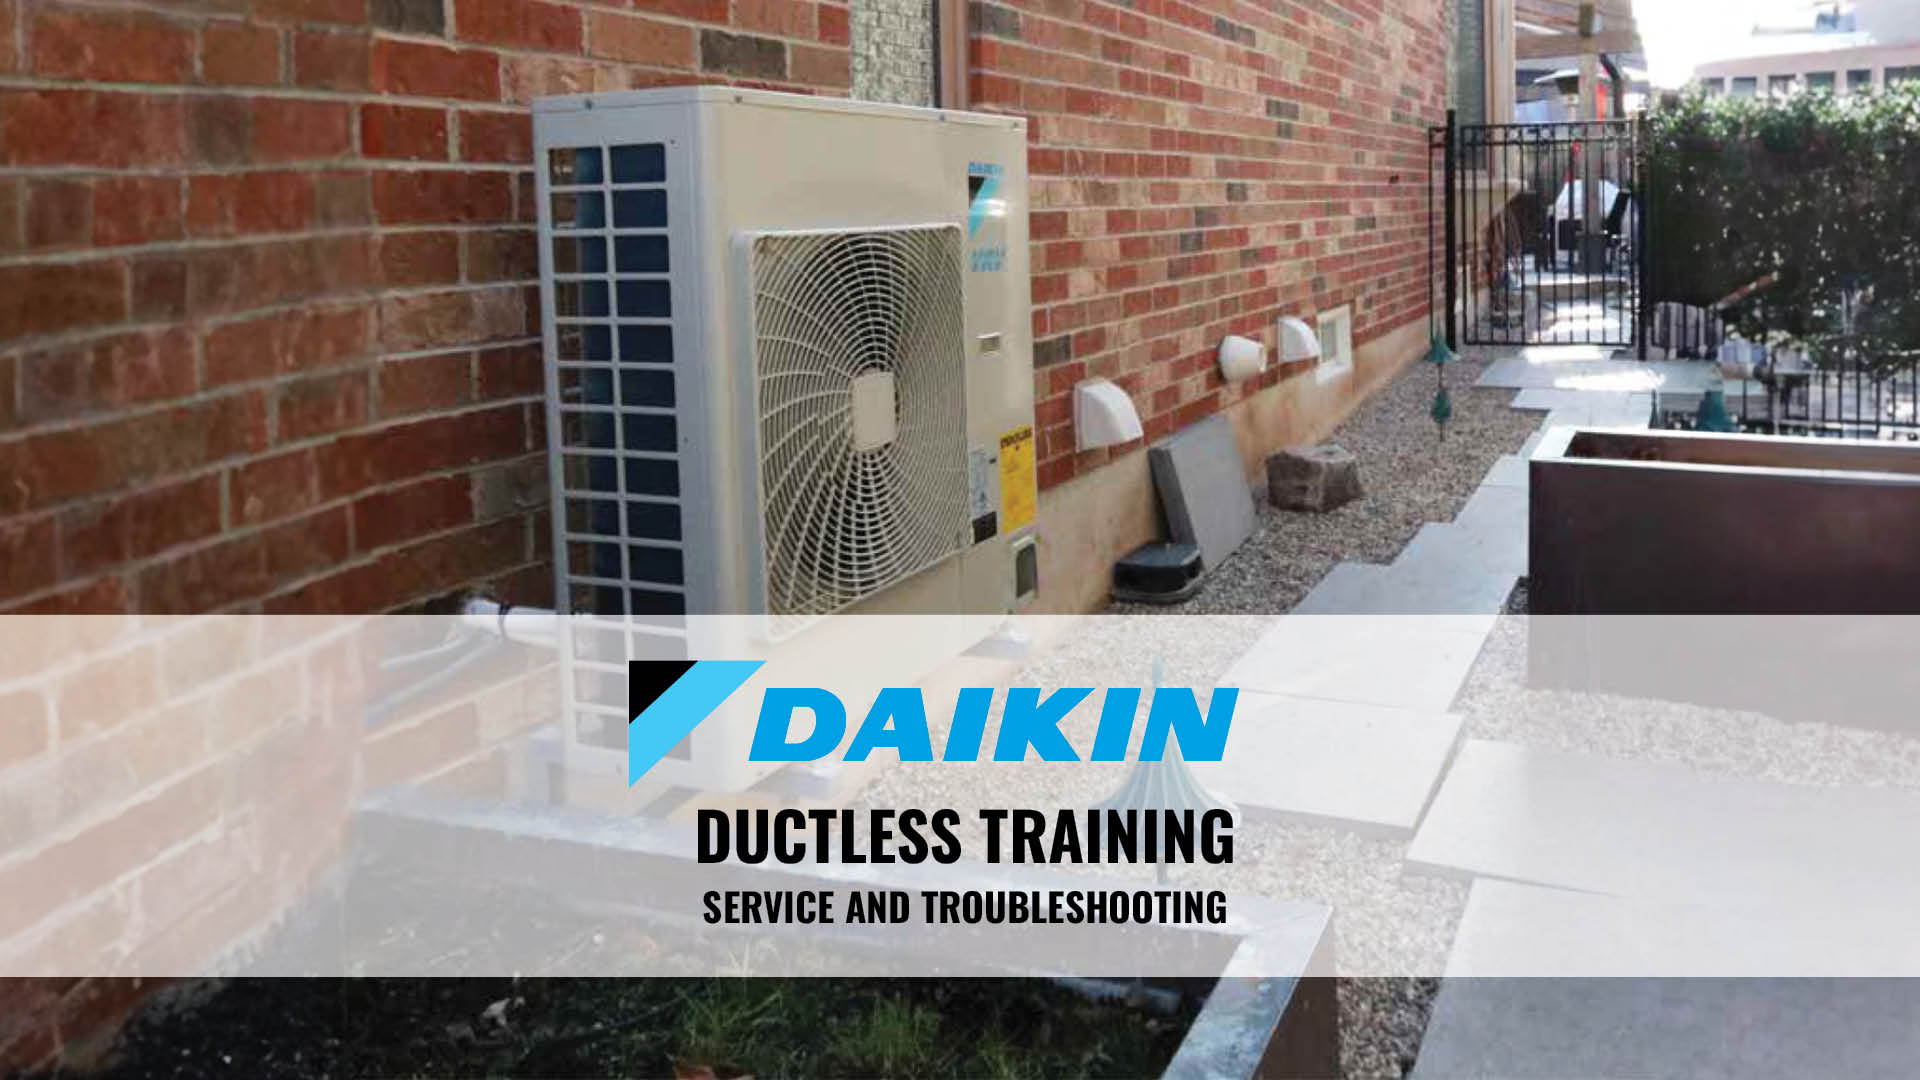 Daikin Ductless Training: Service and Troubleshooting in South Edmonton